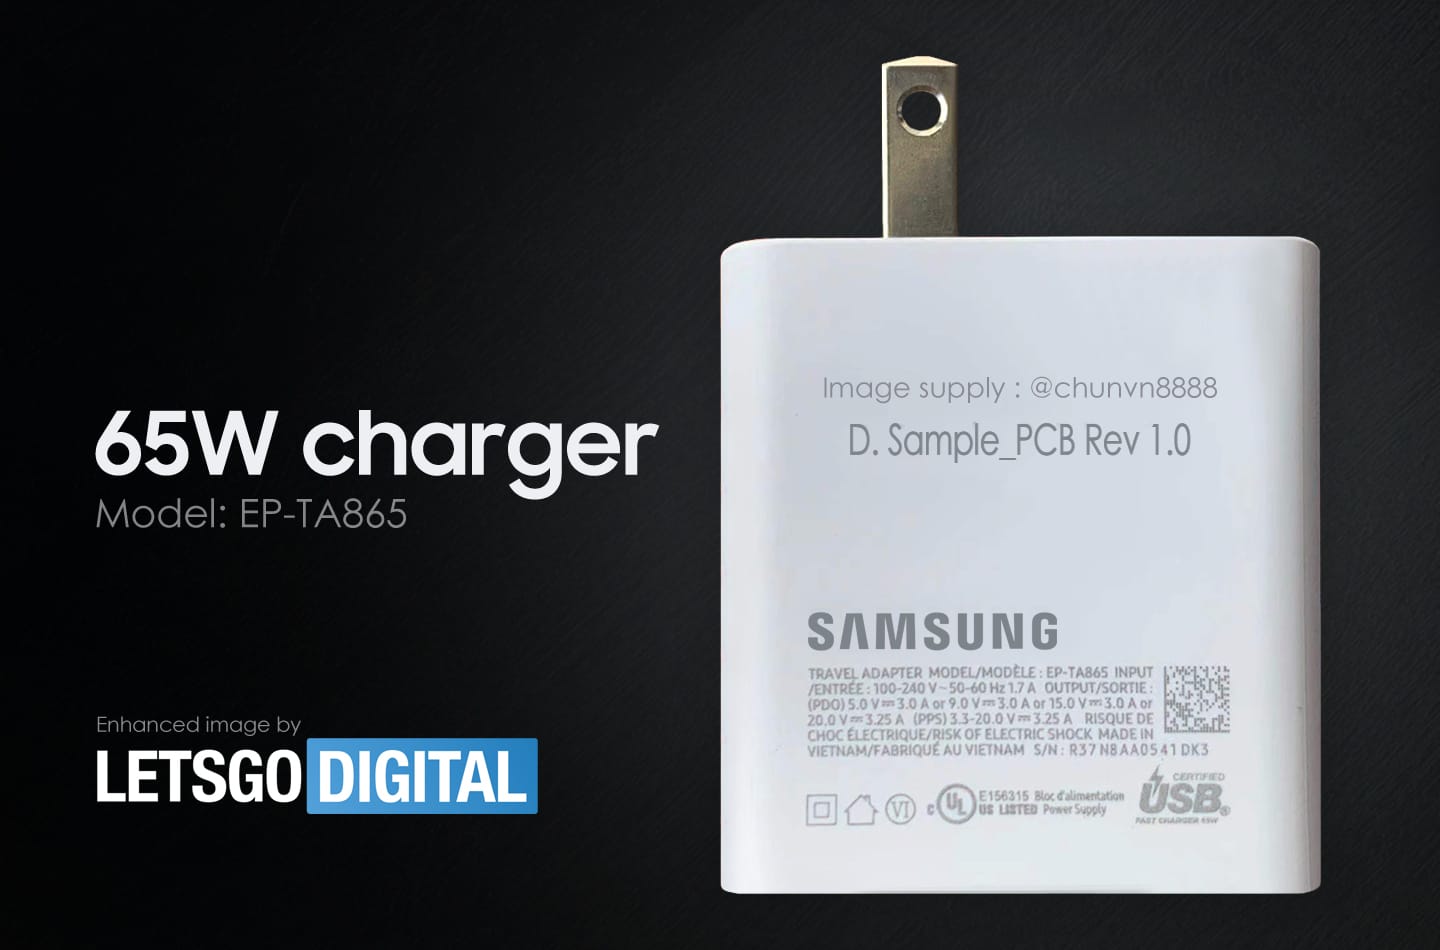 Samsung seems to be quite close to launching its first-ever 65W charger